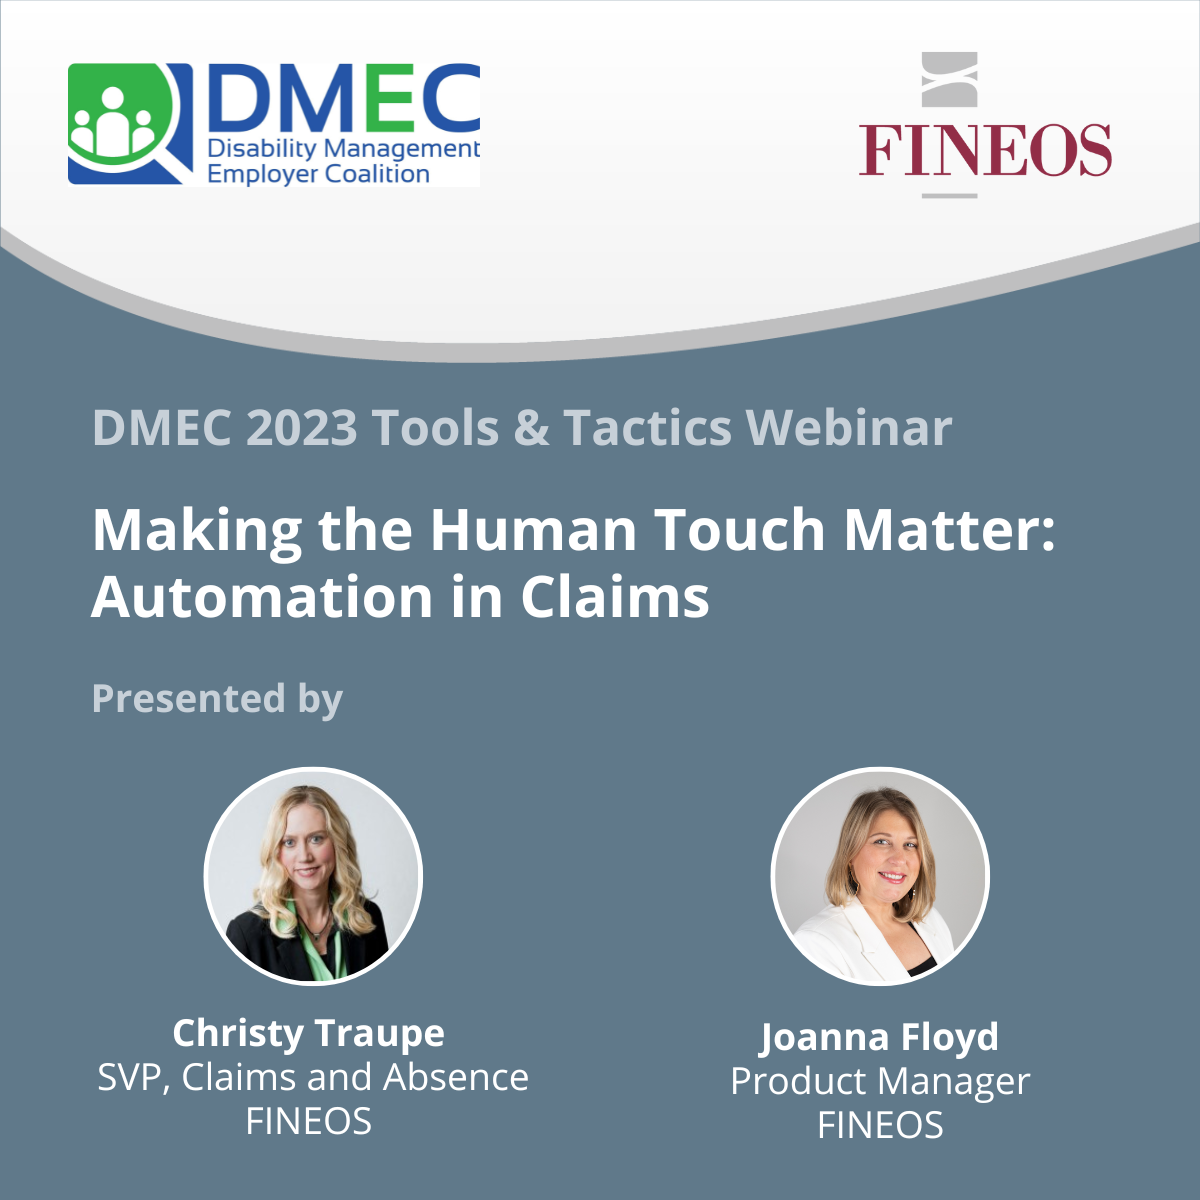 2023 Tools & Tactics Webinar: Making the Human Touch Matter - Automation in Claims